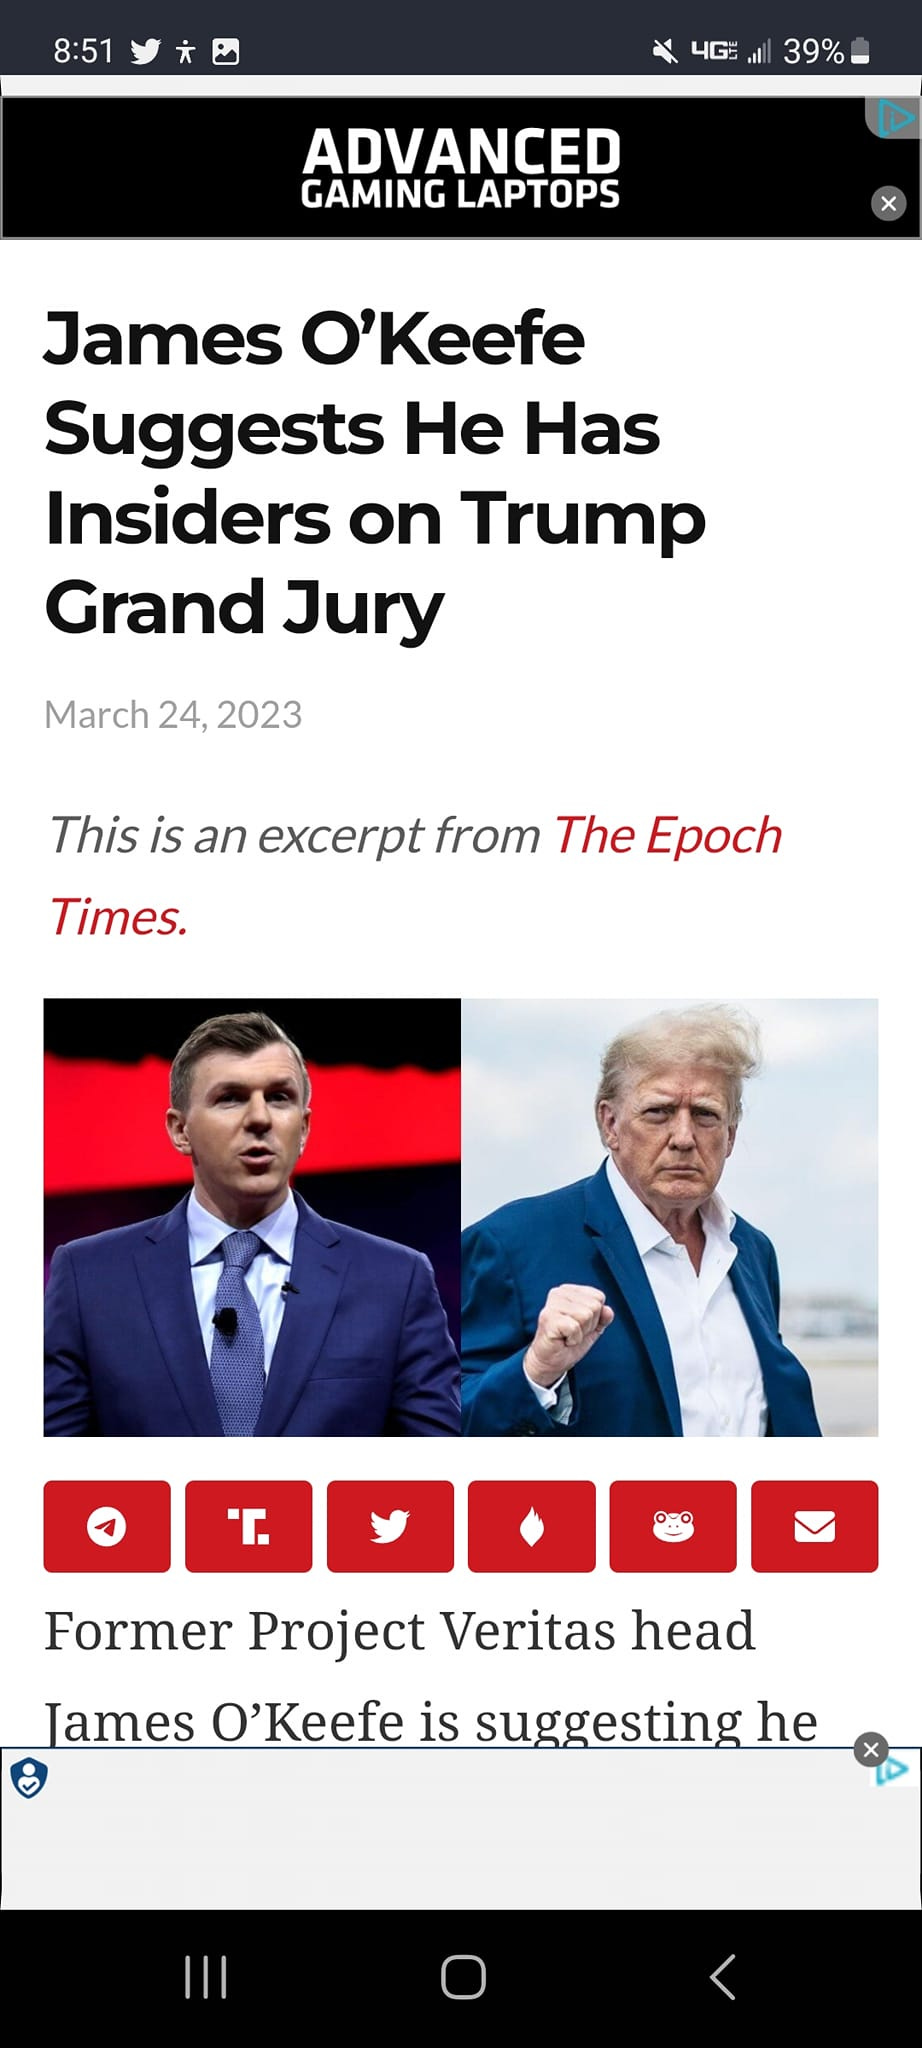 May be an image of 2 people and text that says '8:51 39% ADVANCED GAMING LAPTOPS James O'Keefe Suggests He Has Insiders on Trump Grand Jury March 24, 2023 This is an excerpt from The Epoch Times. "T. Former Project Veritas head James O'Keefe is suggesting he'